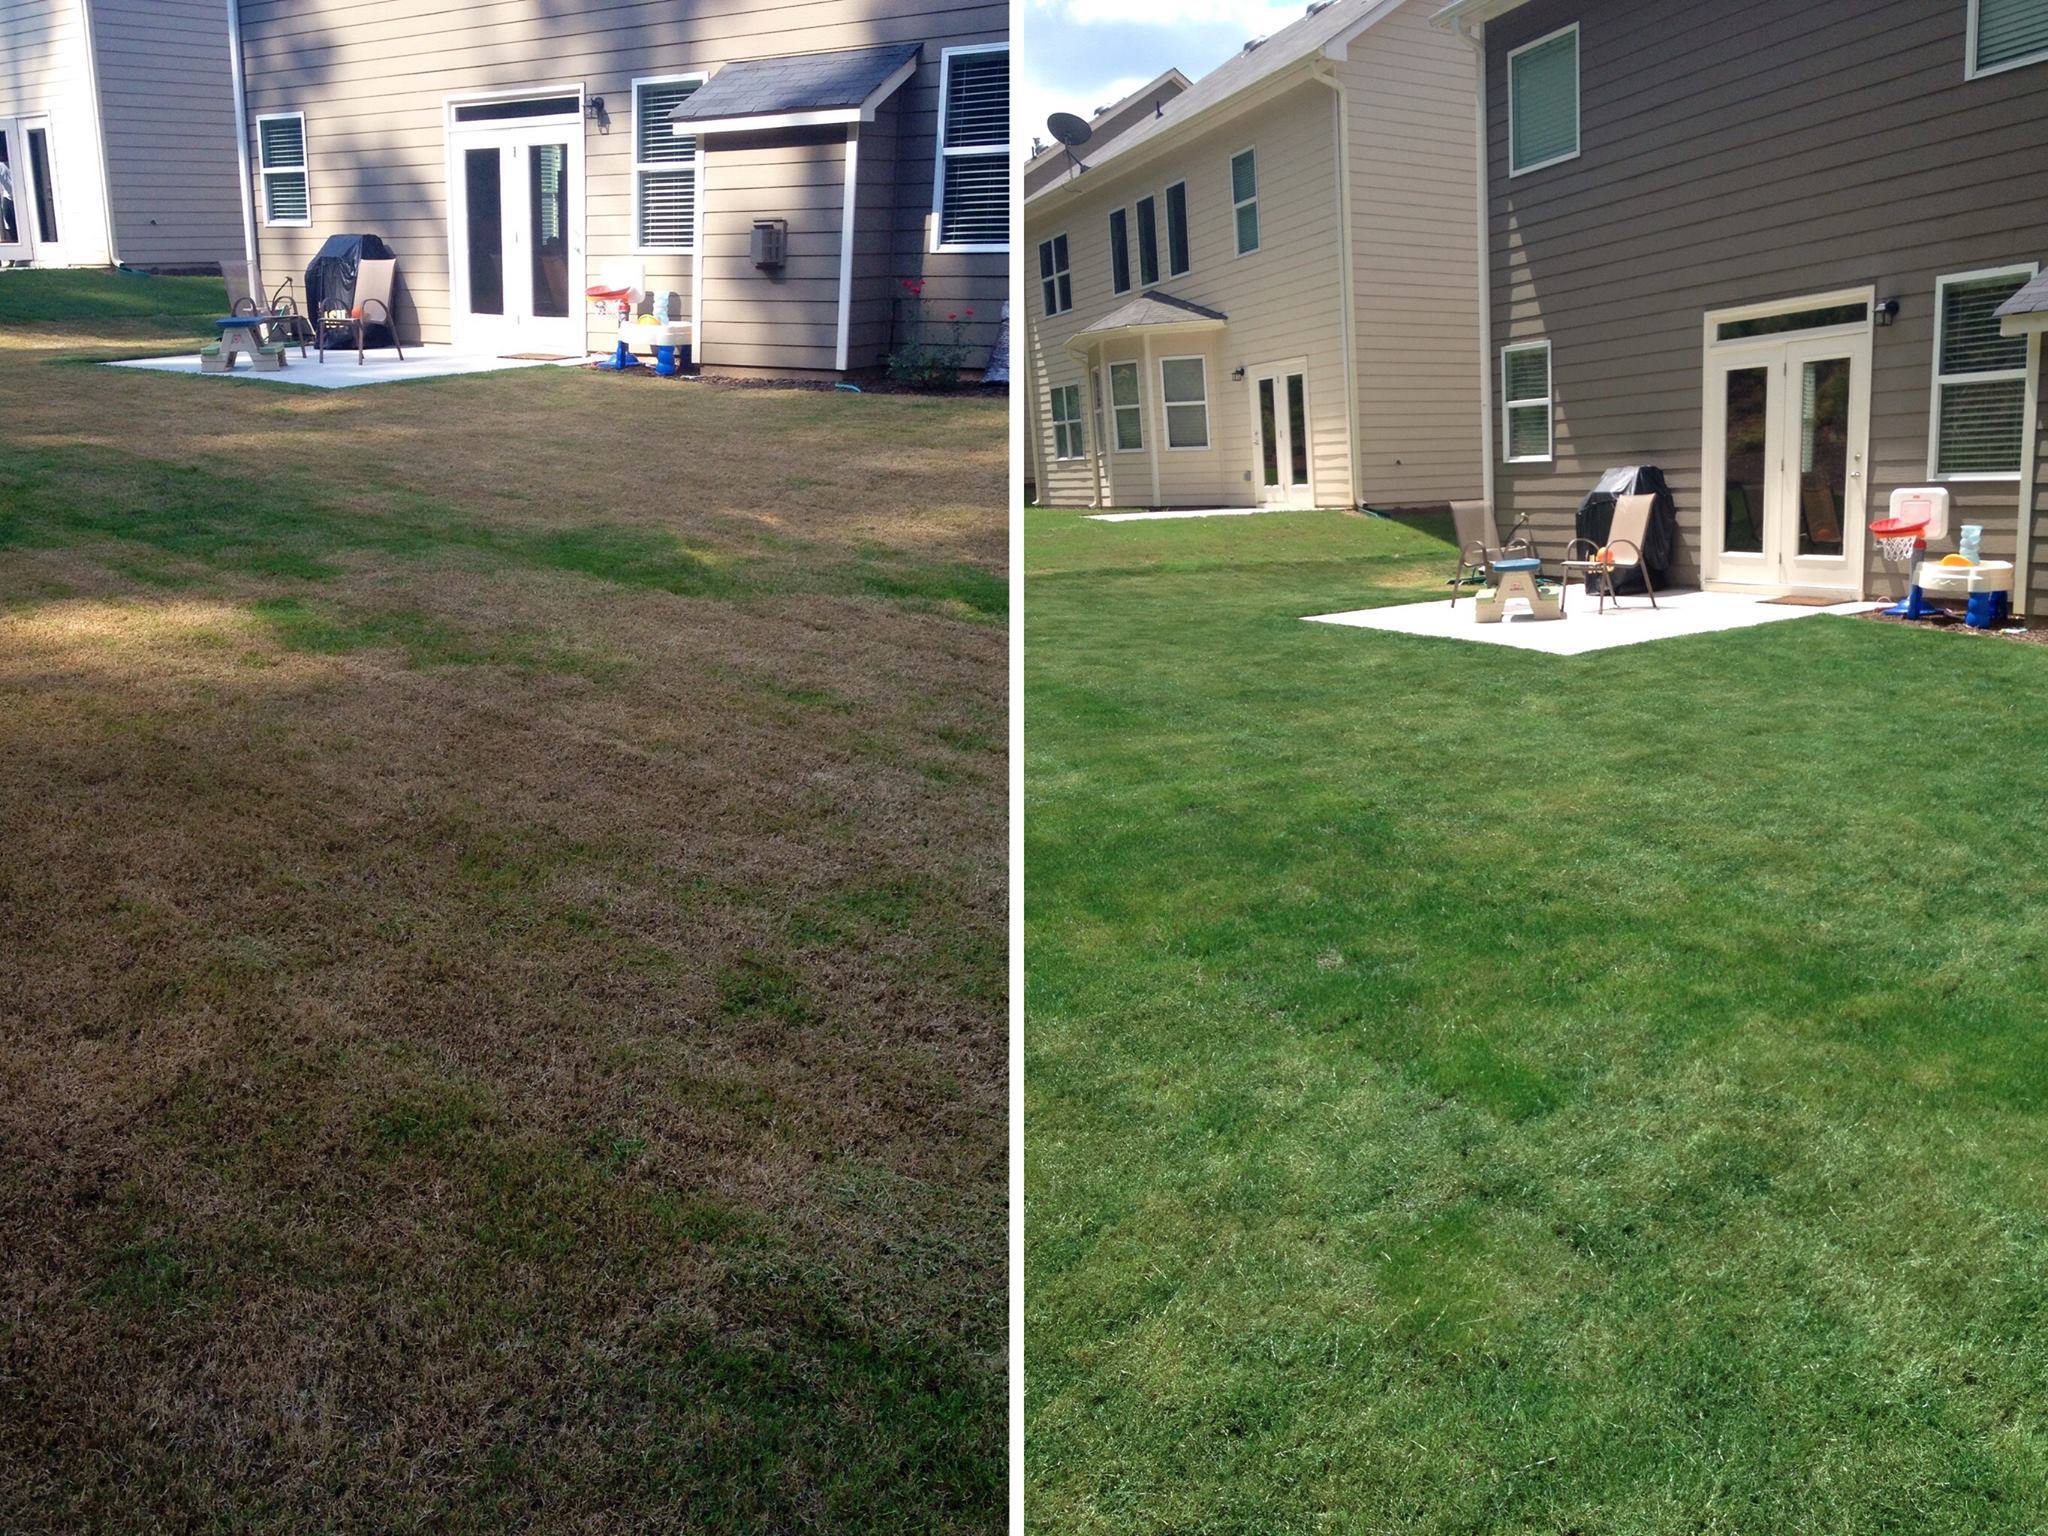 Before and after pictures of this Georgia home lawn show the power of Endurant Premium eco-friendly turf colorant